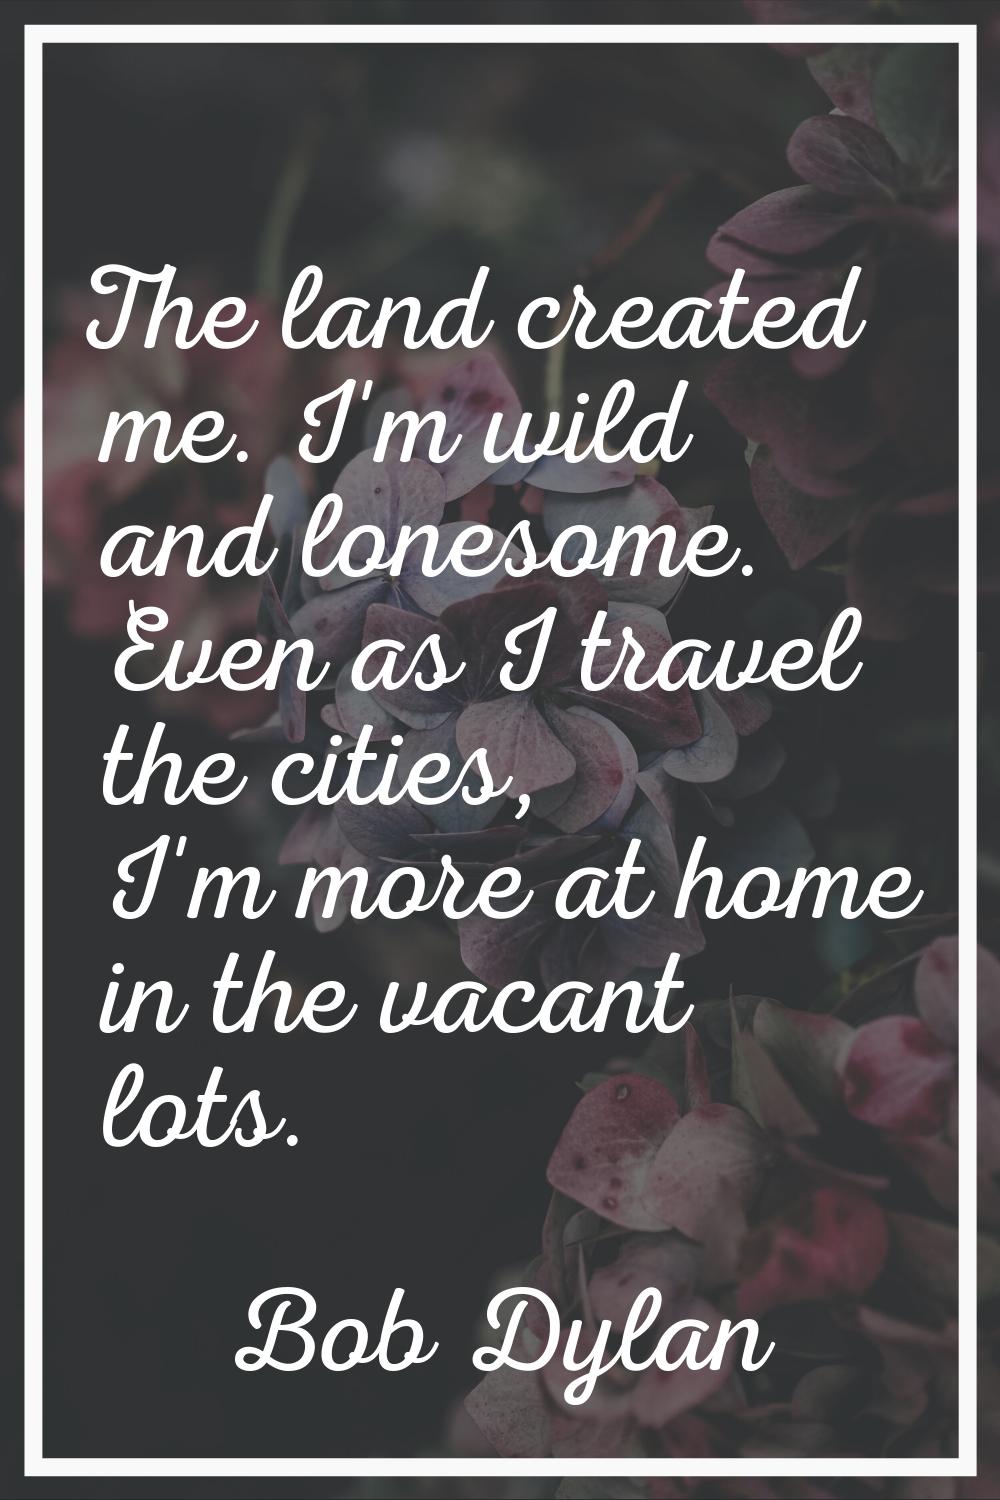 The land created me. I'm wild and lonesome. Even as I travel the cities, I'm more at home in the va